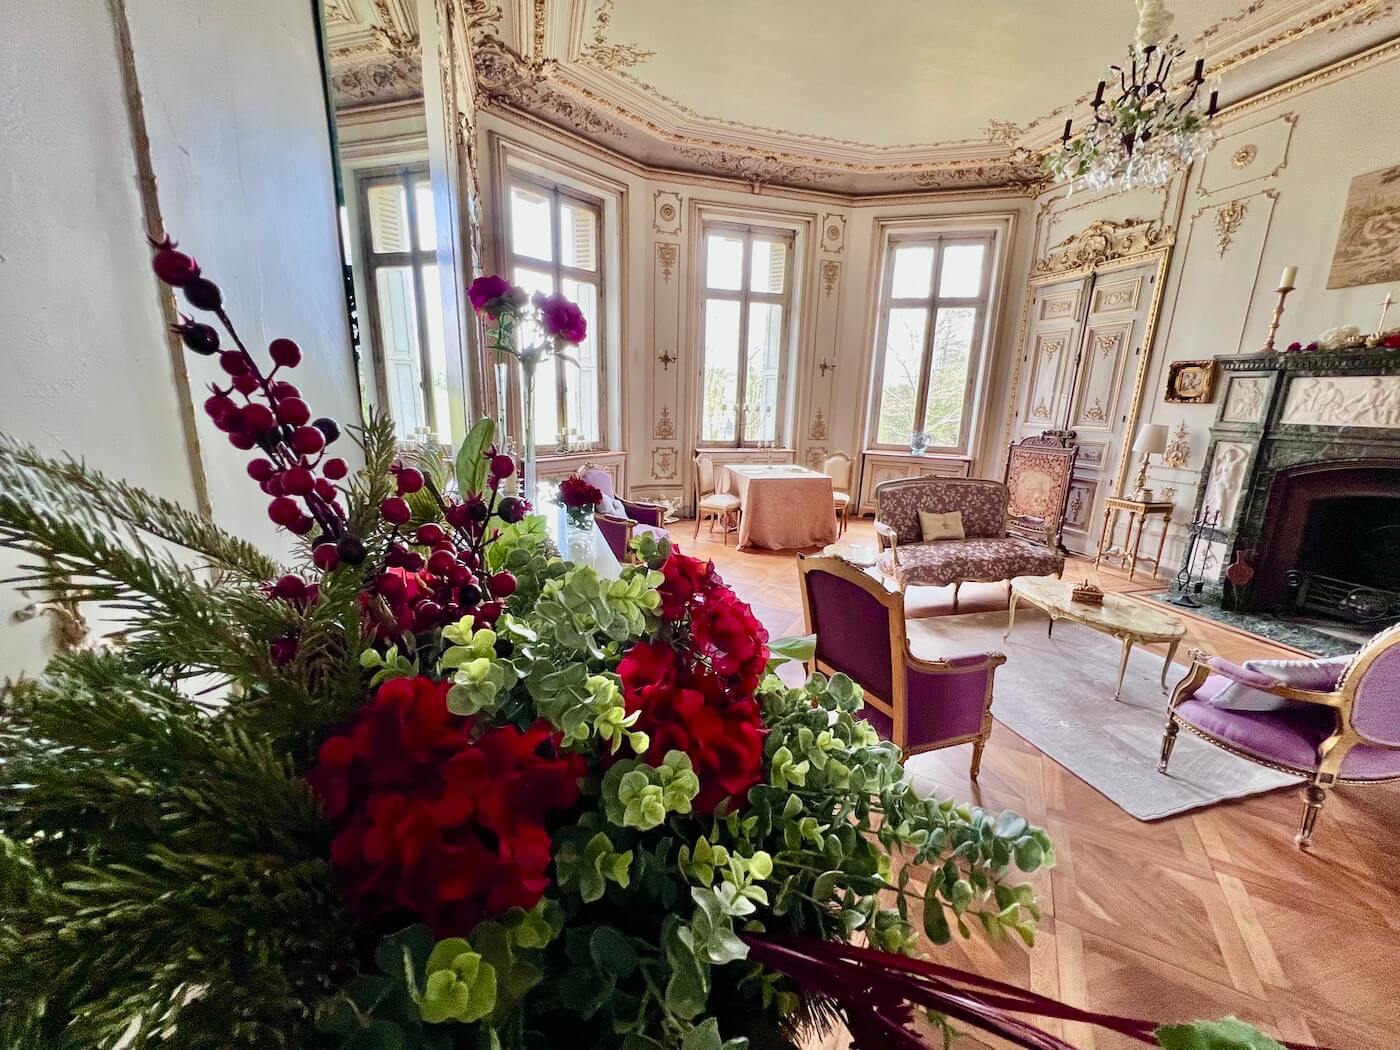 Flowers in the salon